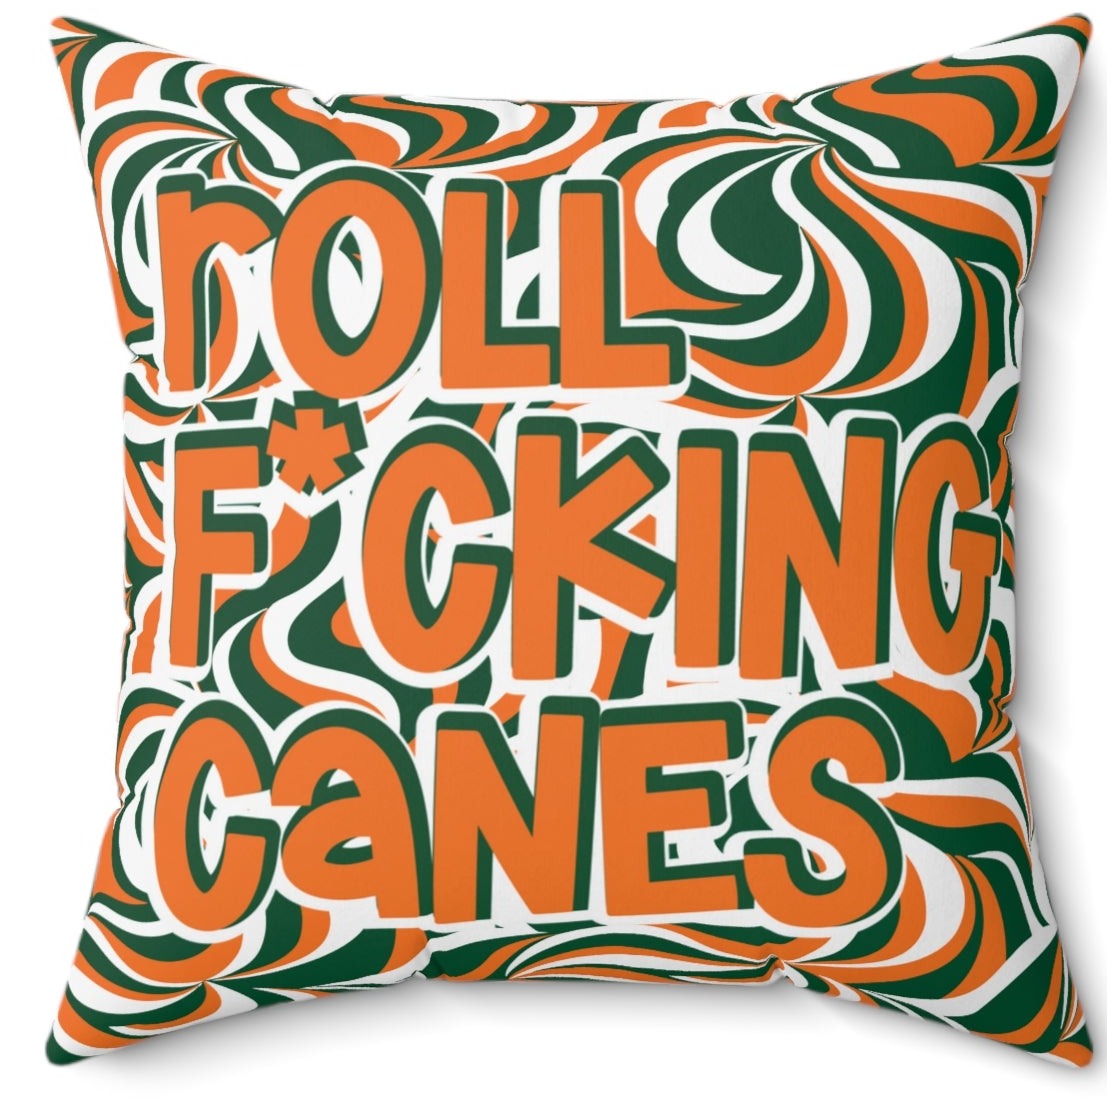 Roll F*cking Canes Bed Party Pillow Cover